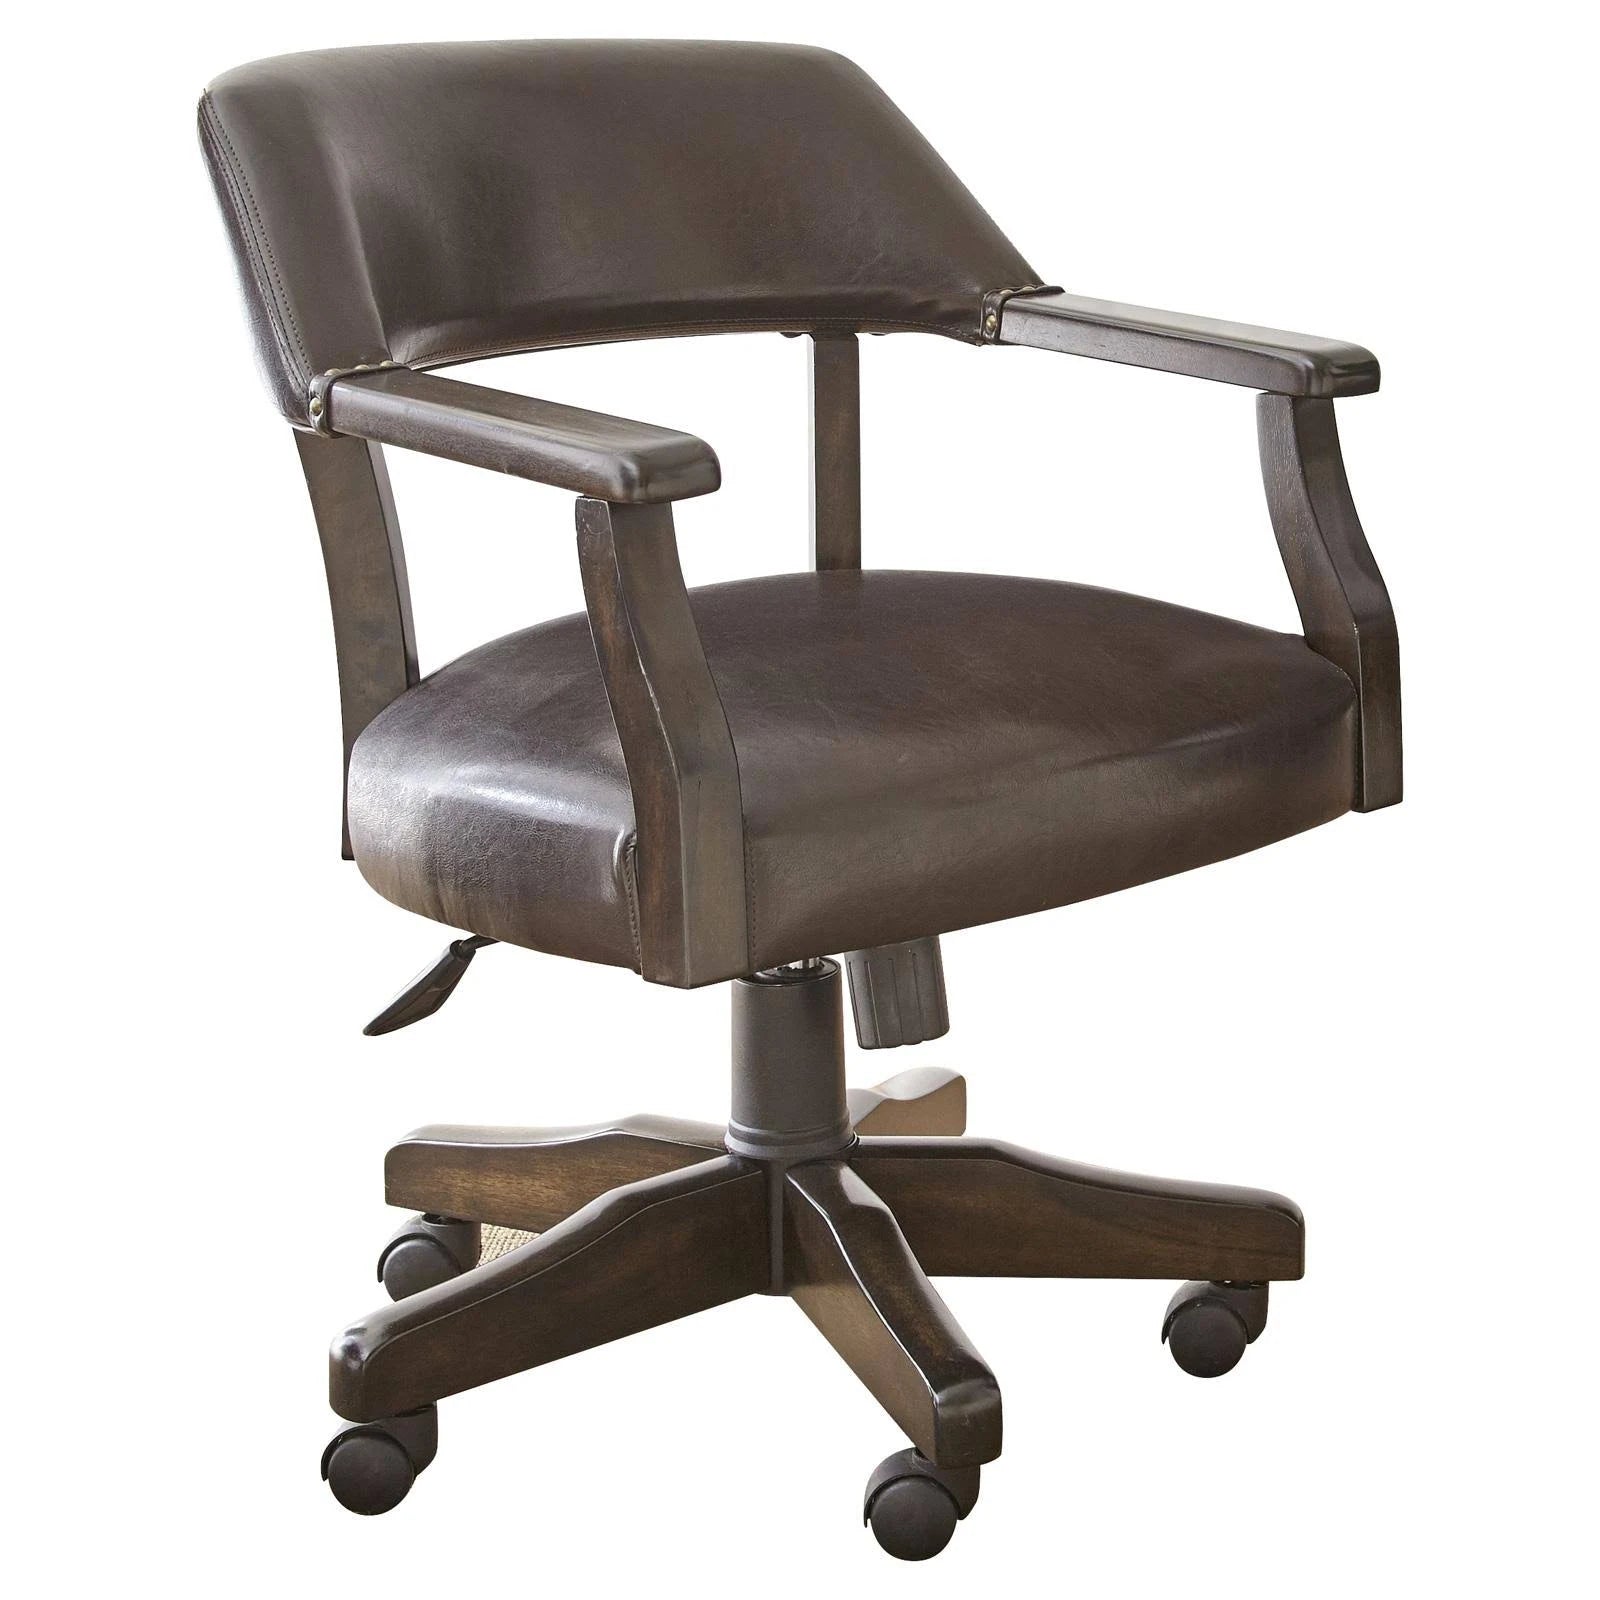 Steve Silver Captain's Poker Game Arm Swivel Chair with Casters in Walnut